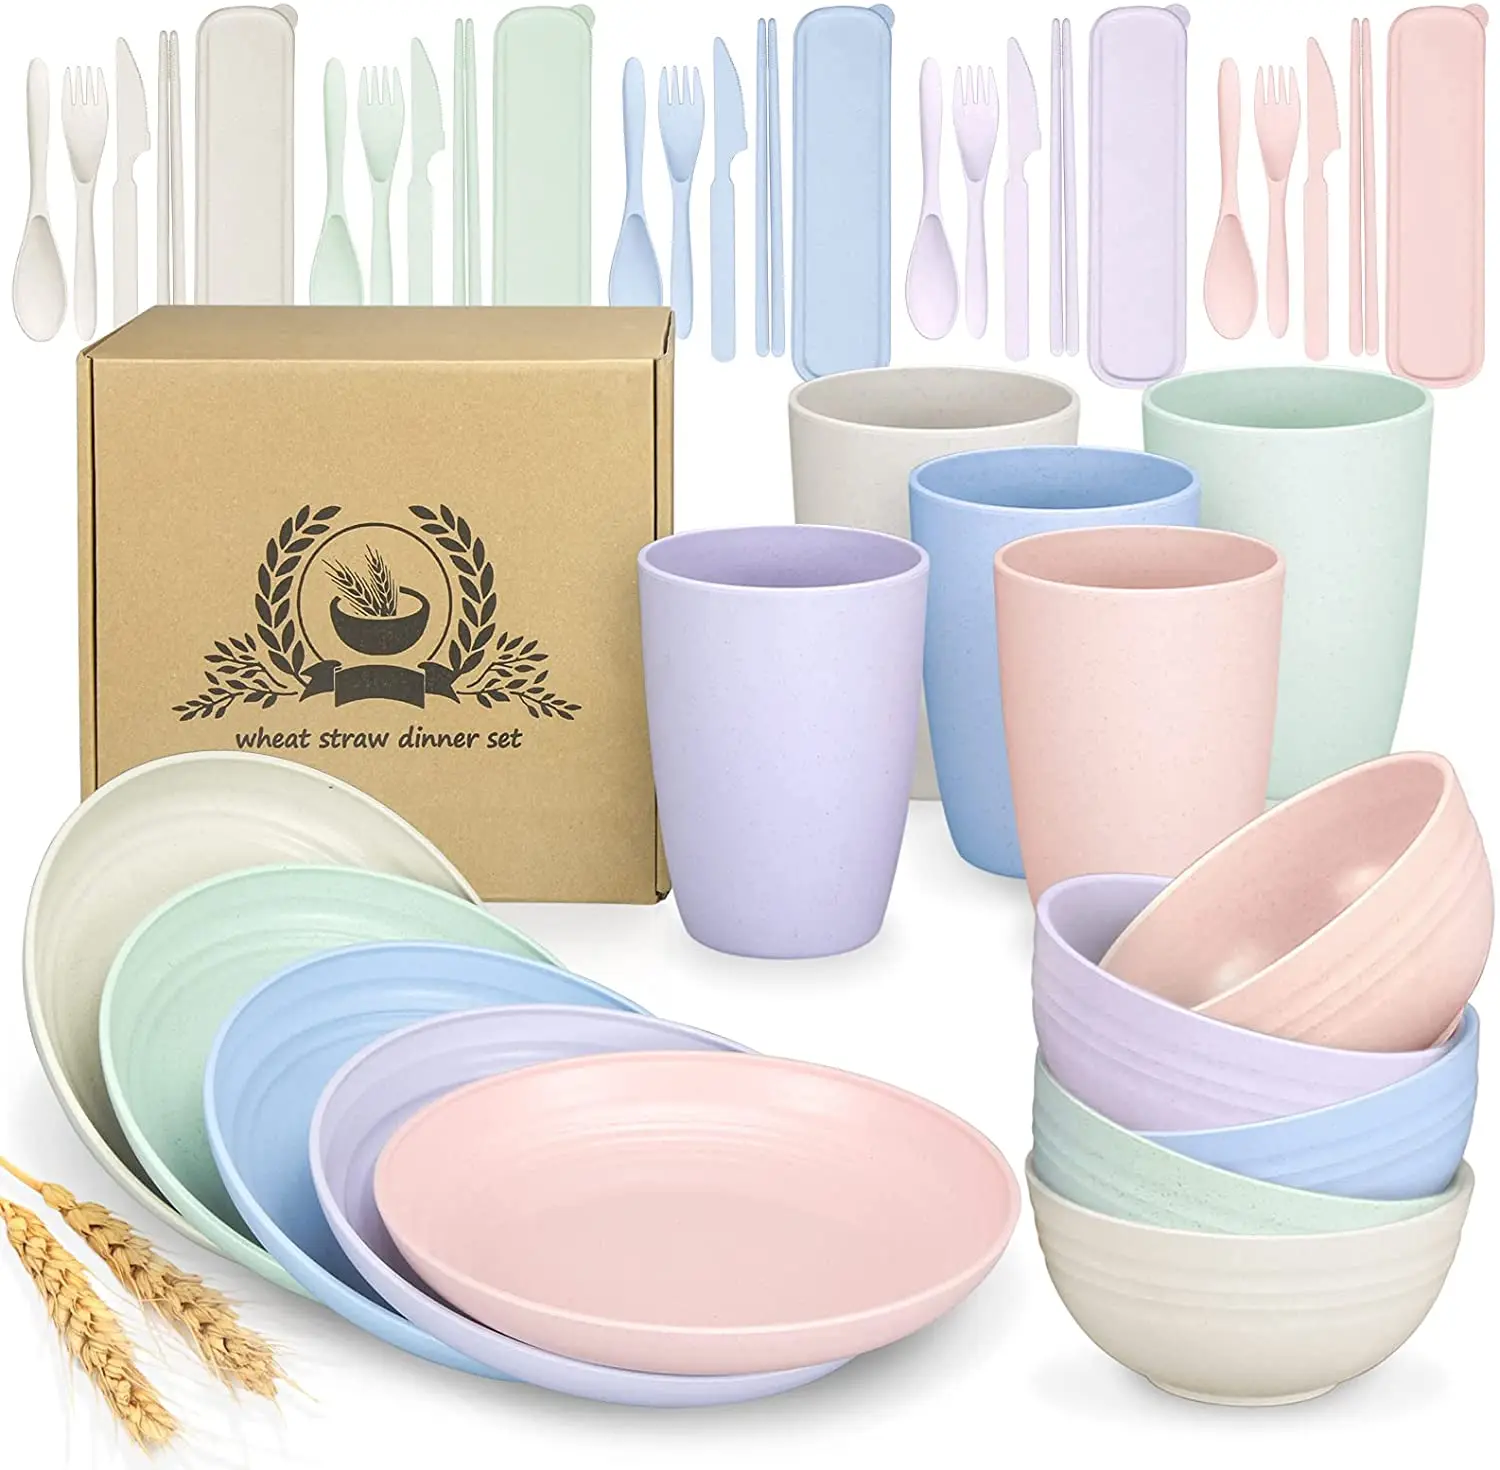 

Wheat Straw Dinnerware Sets Service for 5 People (40 Pcs)Unbreakable Dinnerware for Kids Dinner Plates Dessert Plate Cereal Bowl, Blue / beige / pink / green